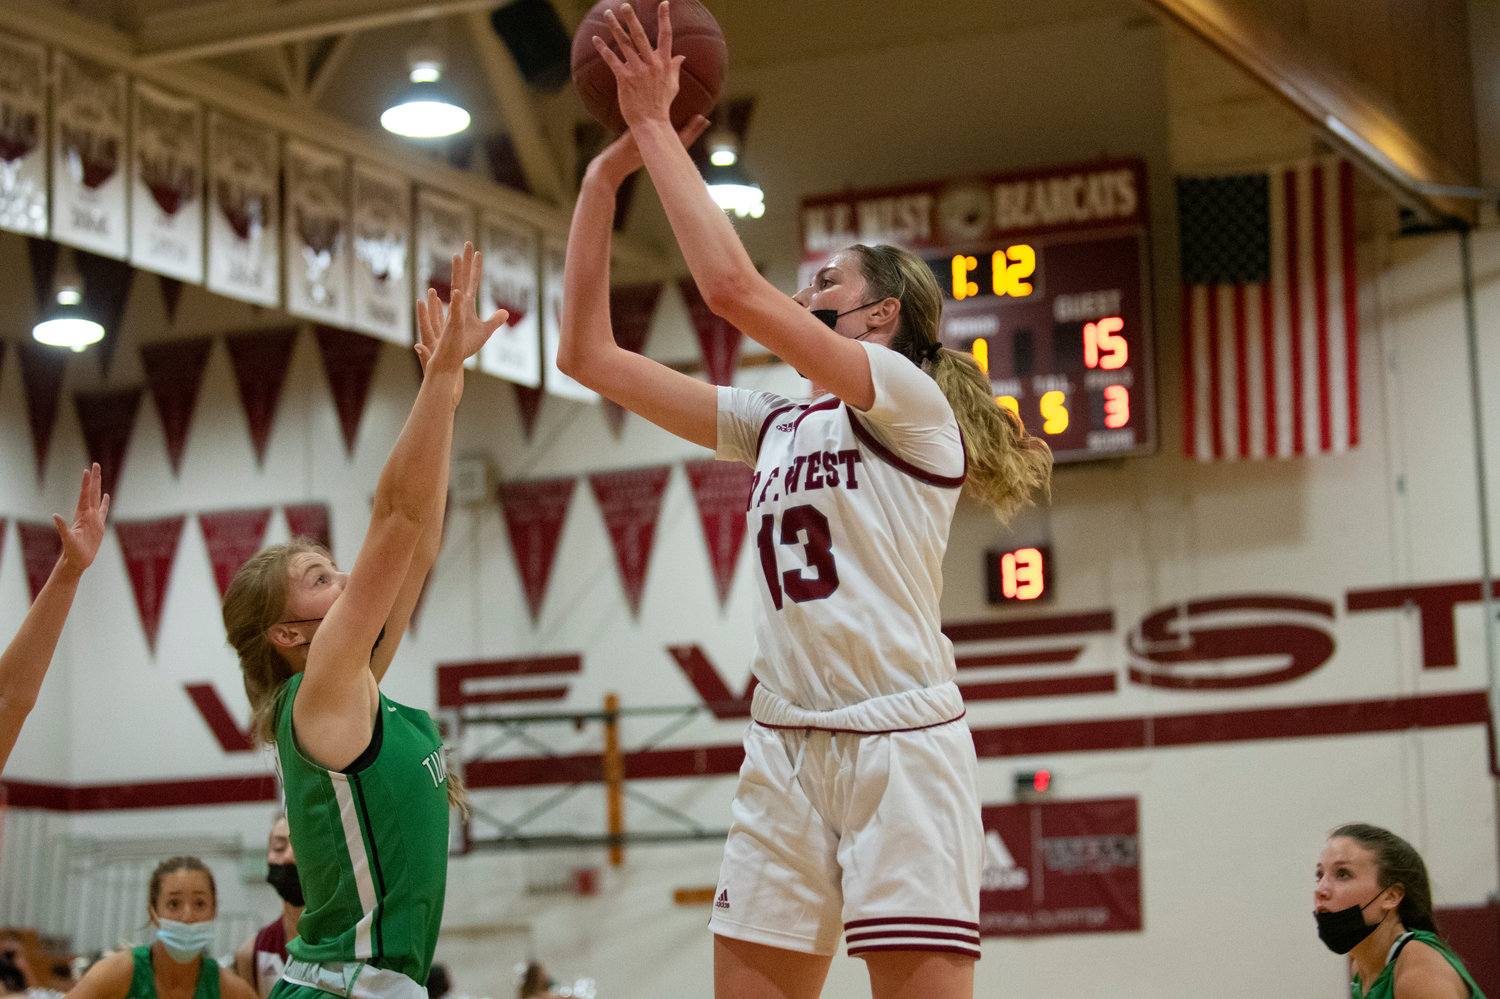 W.F. West junior Drea Brumfield shoots a midrange jumper over a Tumwater defender at home on Monday.